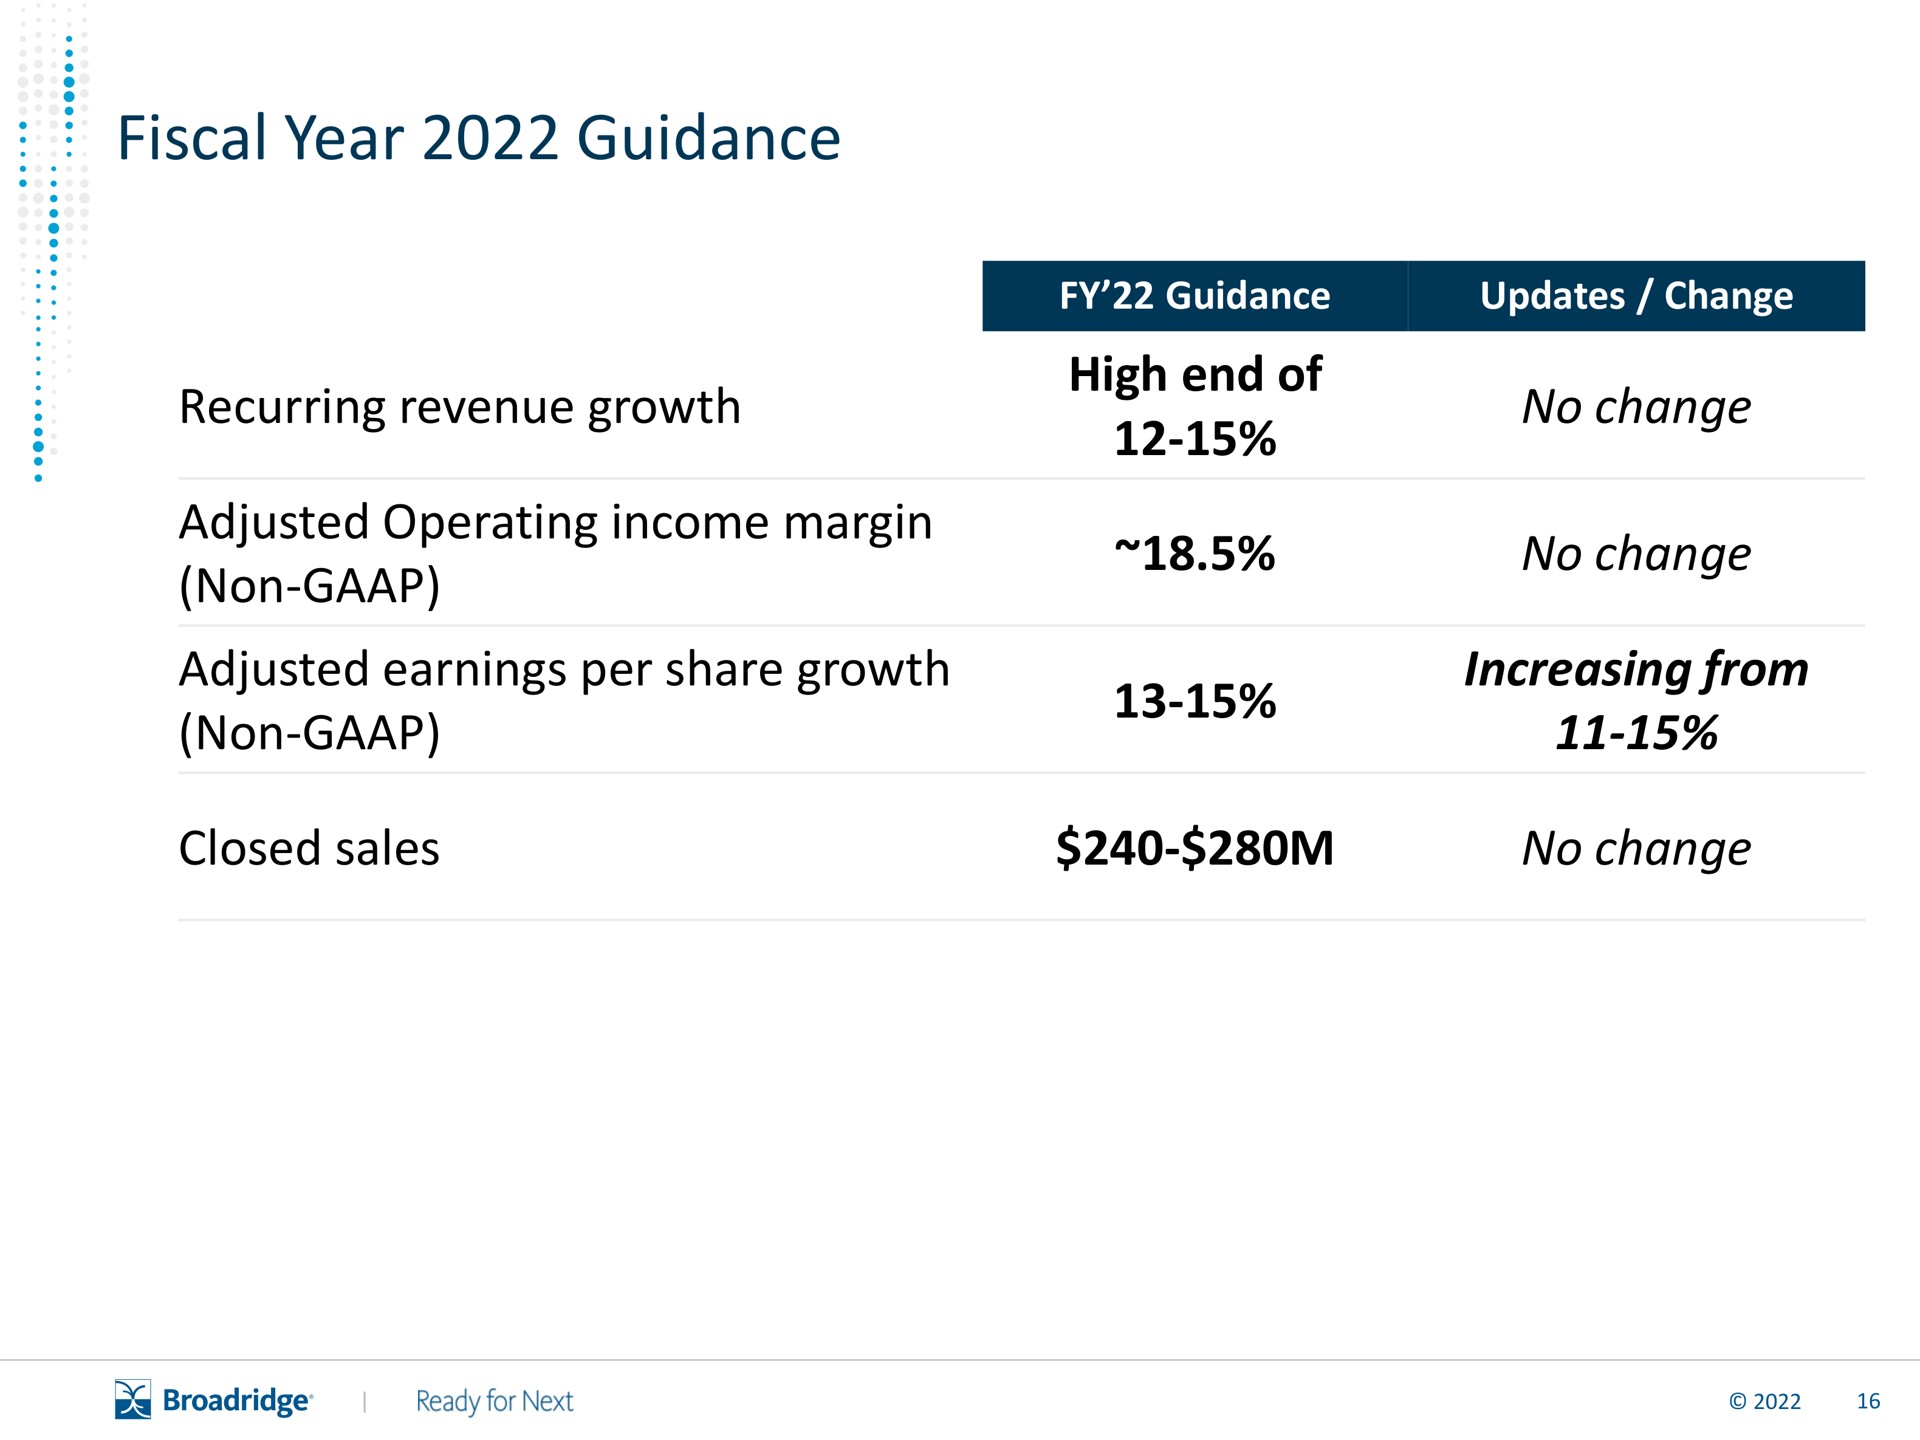 fiscal year guidance recurring revenue growth adjusted operating income margin non adjusted earnings per share growth non high end of no change no change increasing from closed sales no change | Broadridge Financial Solutions